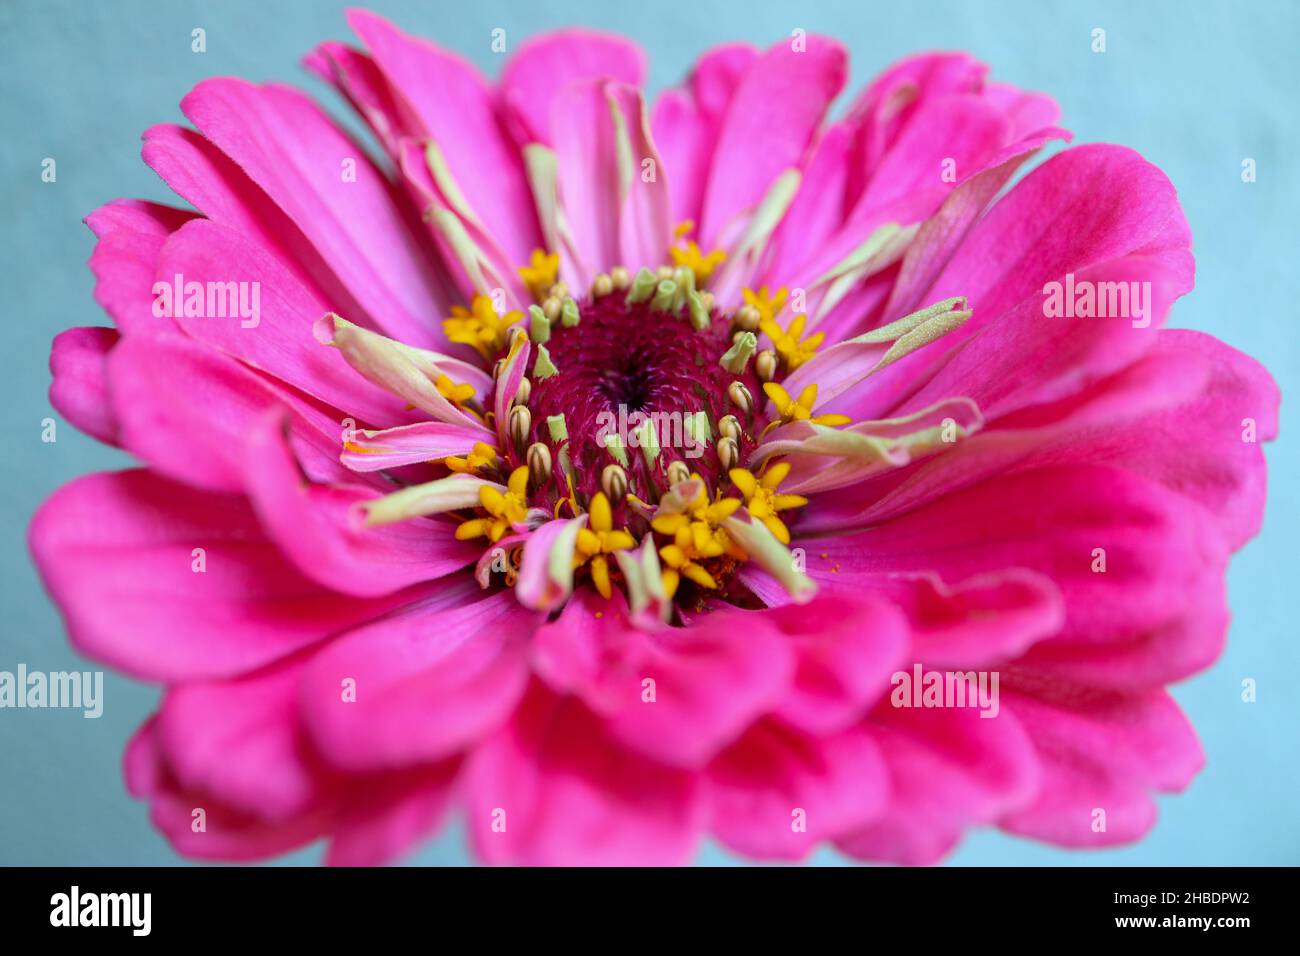 Pink Zinnia with delicate petals and yellow stamens, pink Zinnia on light blue background macro, flower head, floral photo, stock image Stock Photo